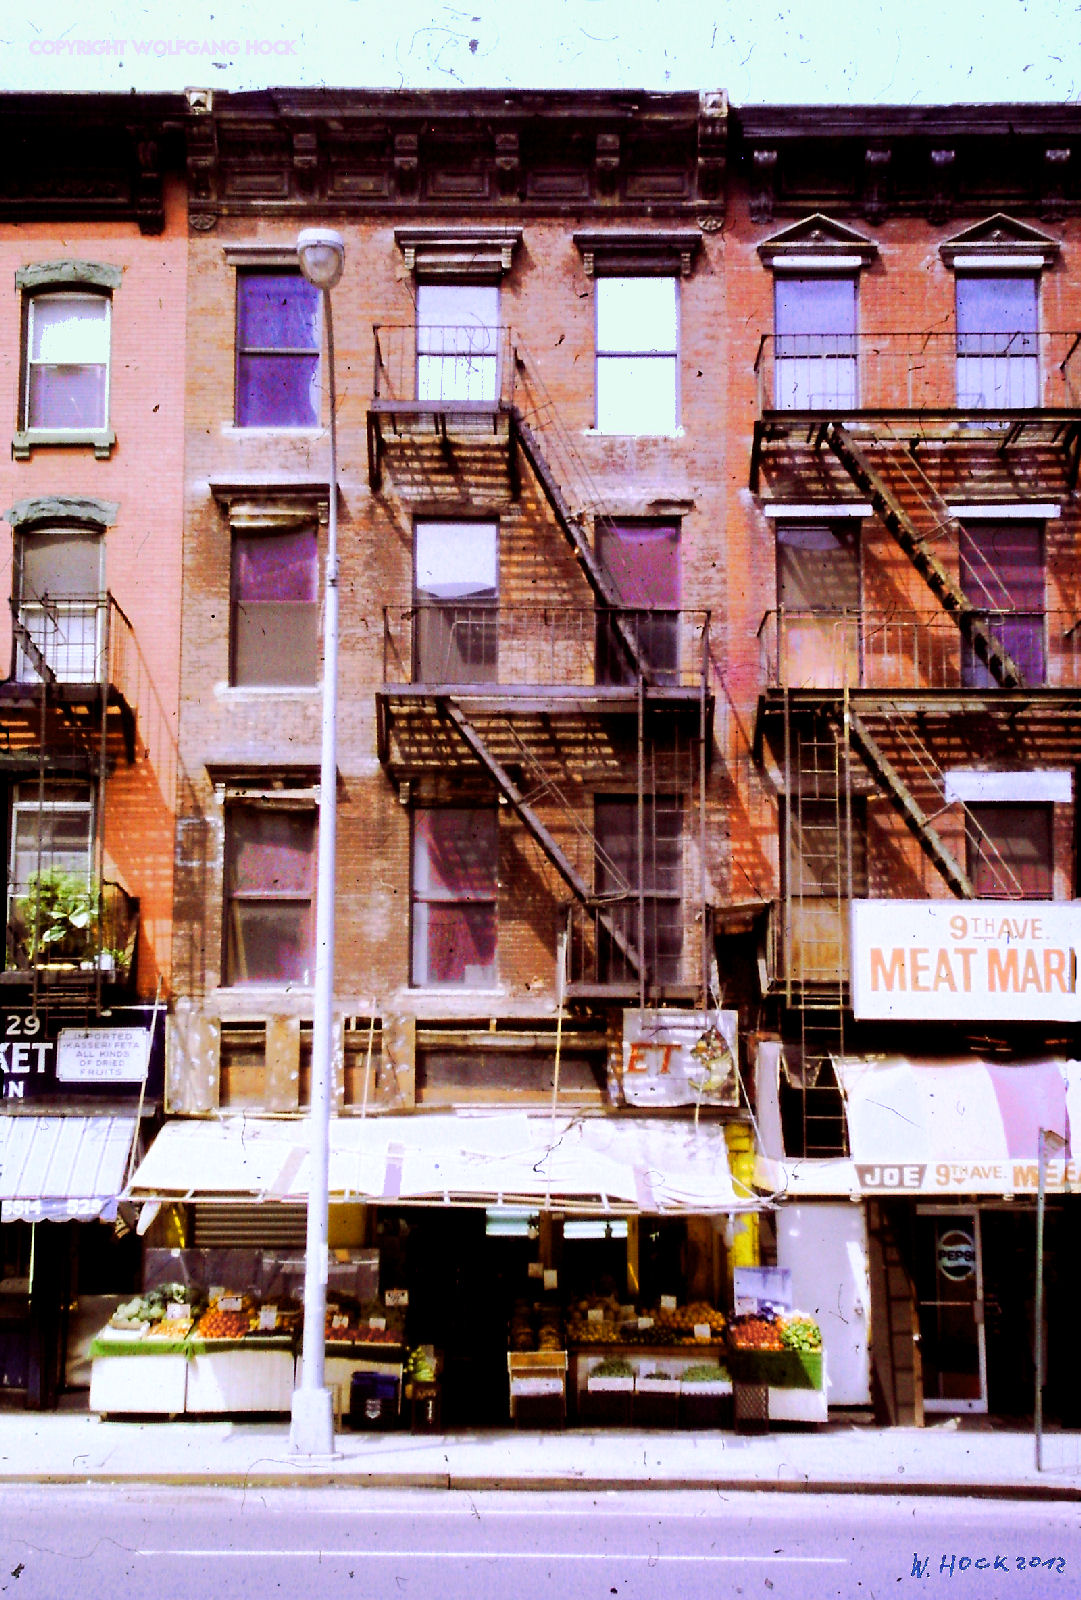 9th Ave. meat market 2012   Inkjet printed photographic mixed media on paper, 45 x 67 cm